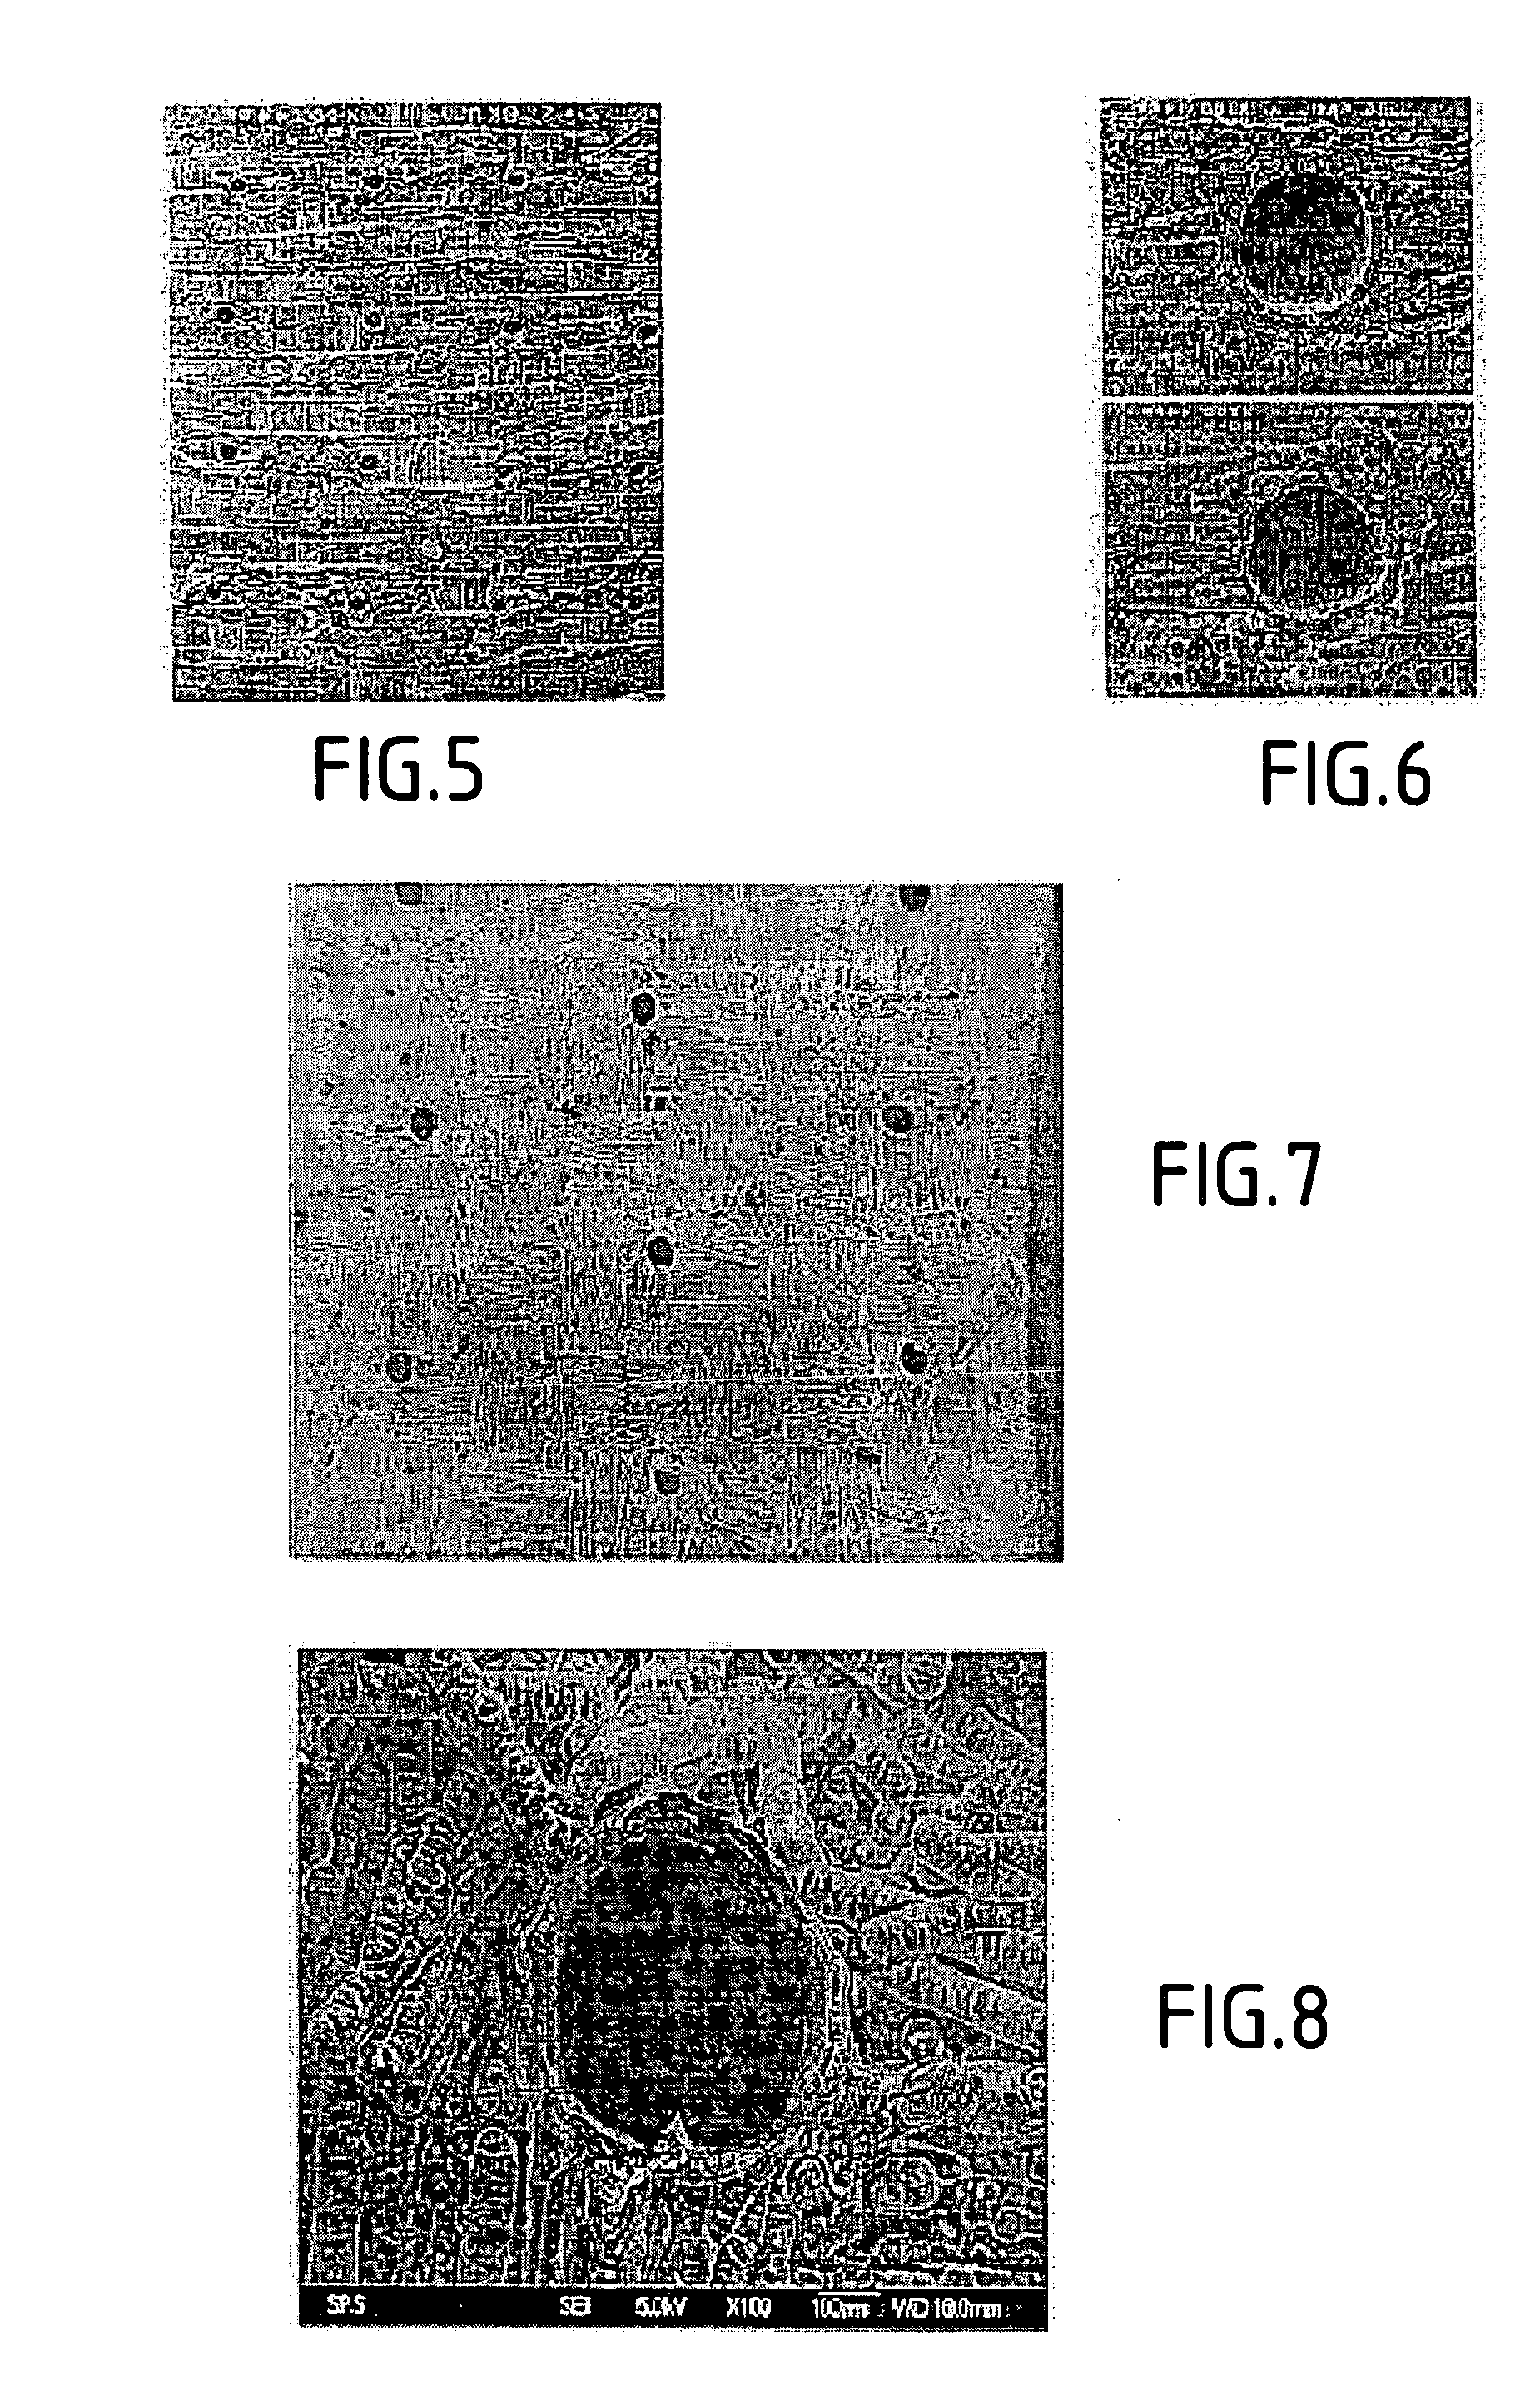 Method of making a multi-perforated part out of ceramic matrix composite material